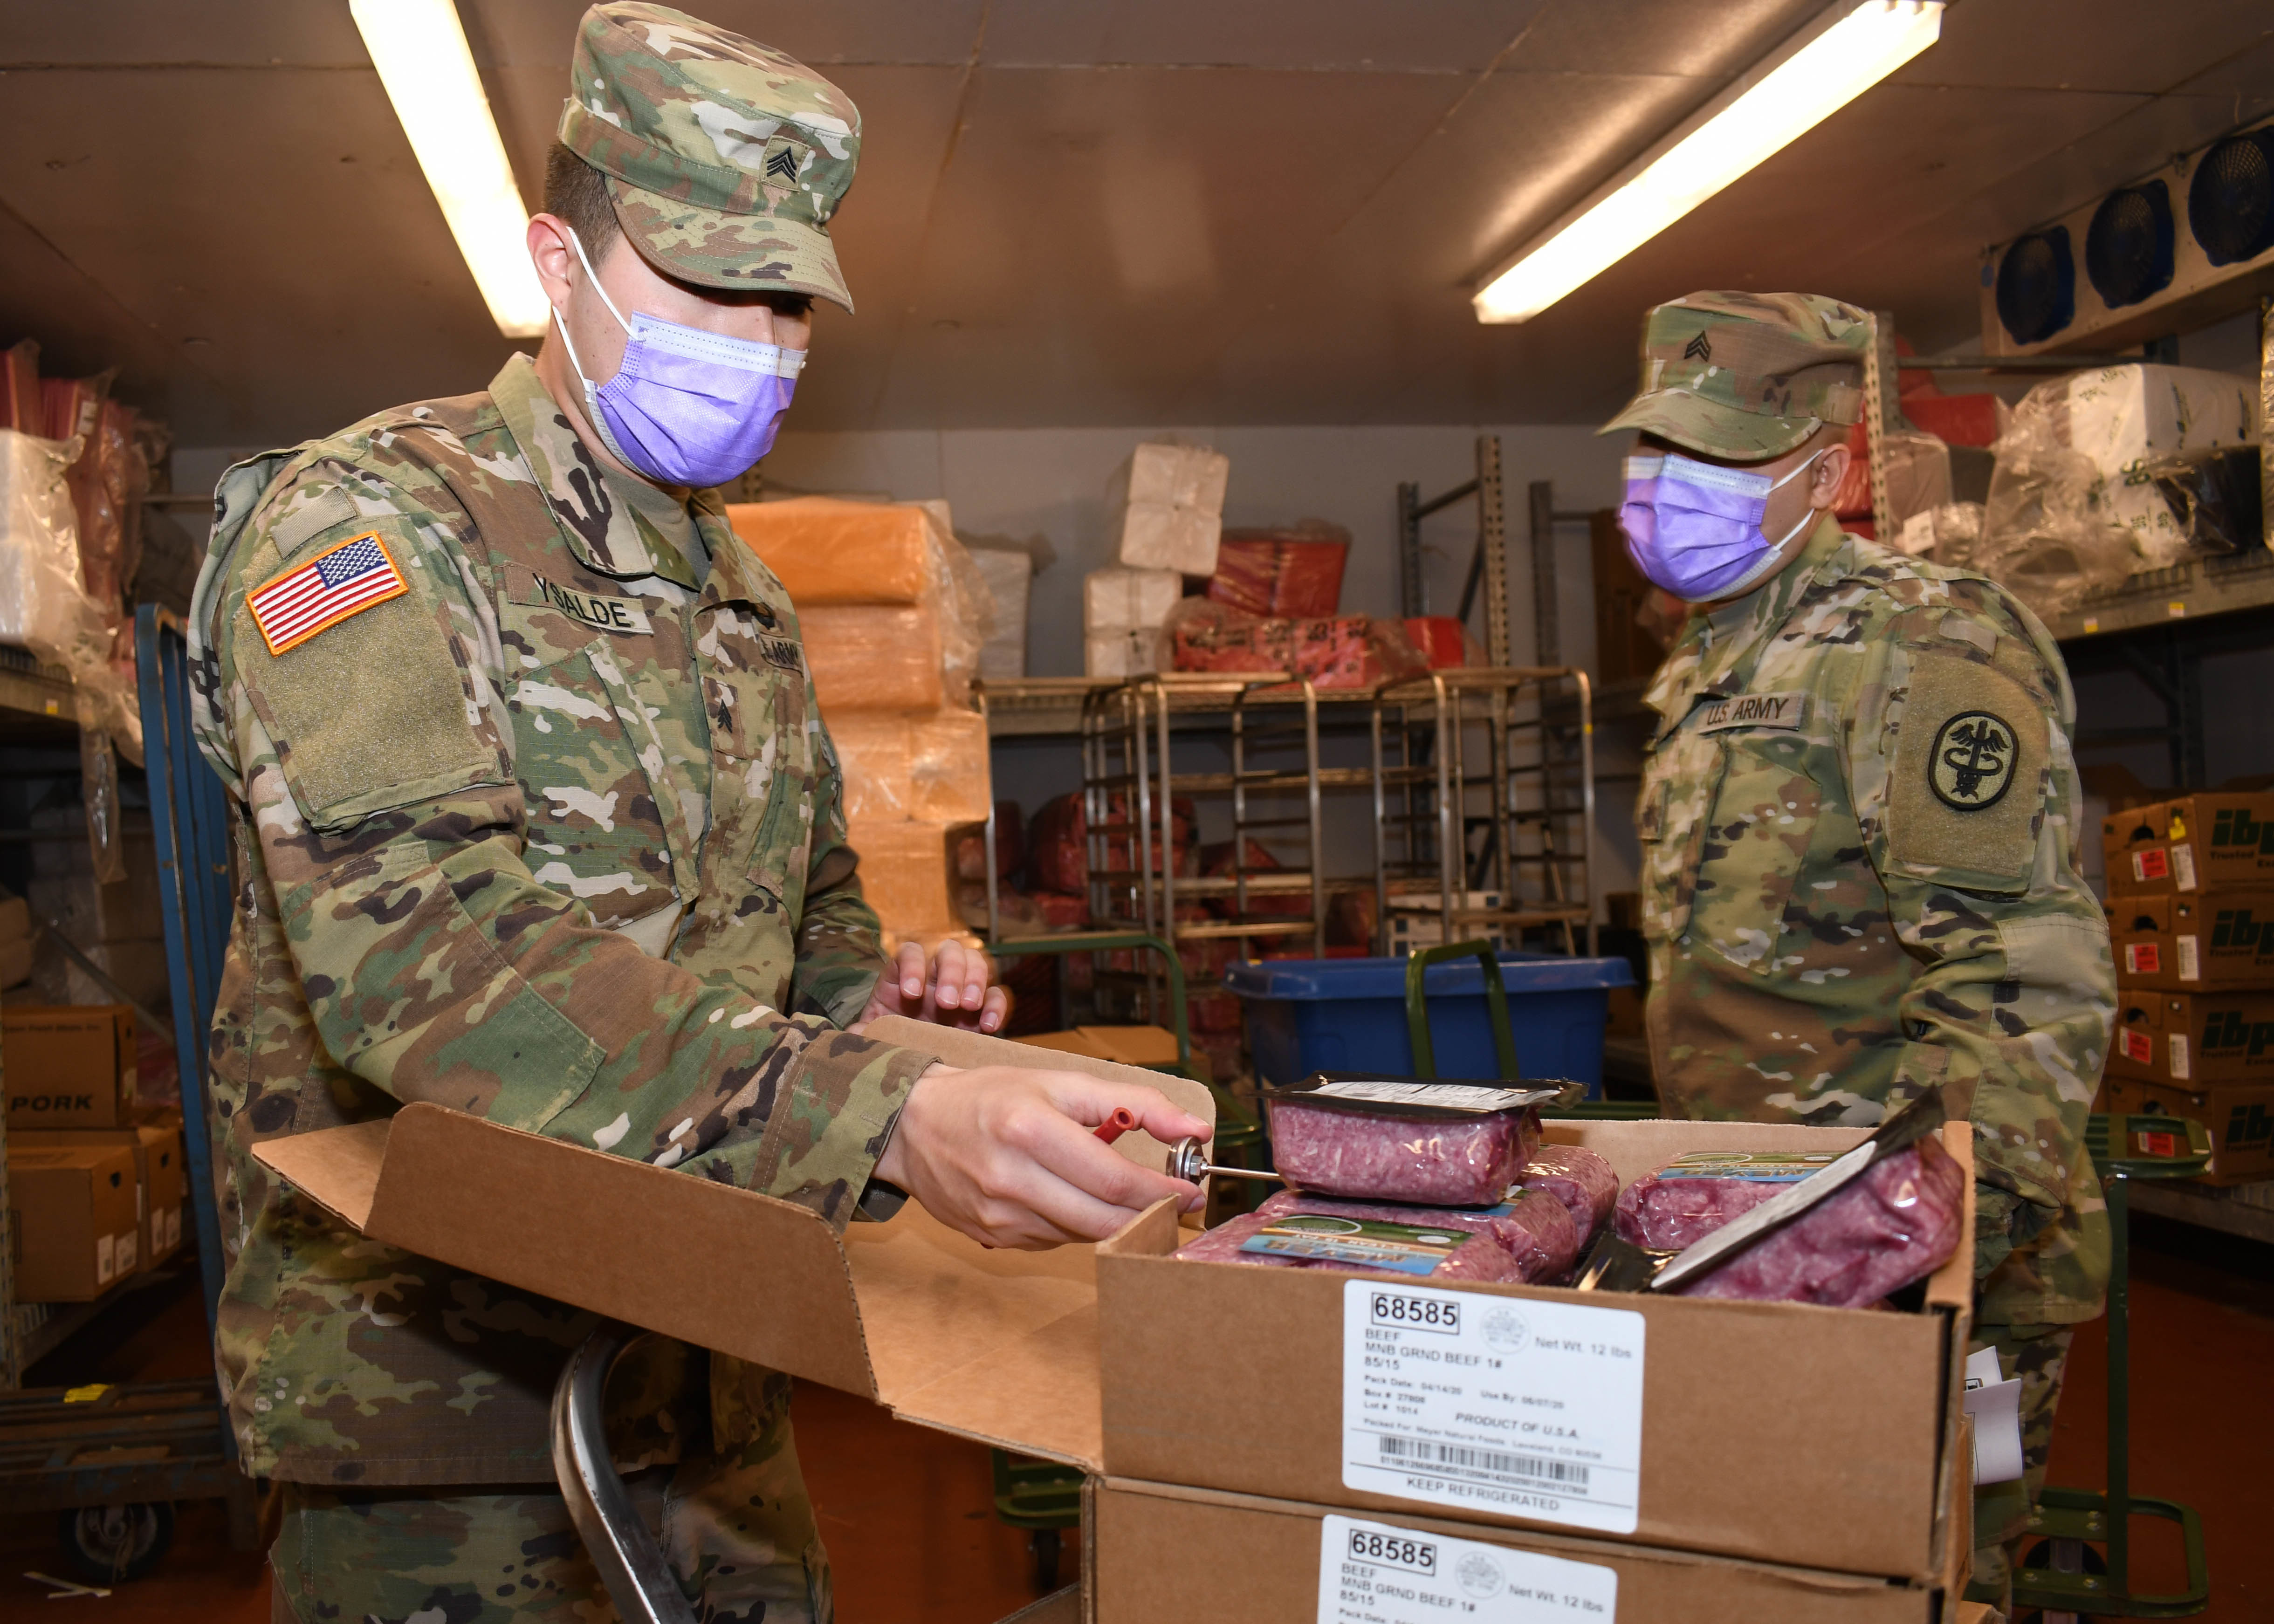 Two soldiers inspecting food out of a box